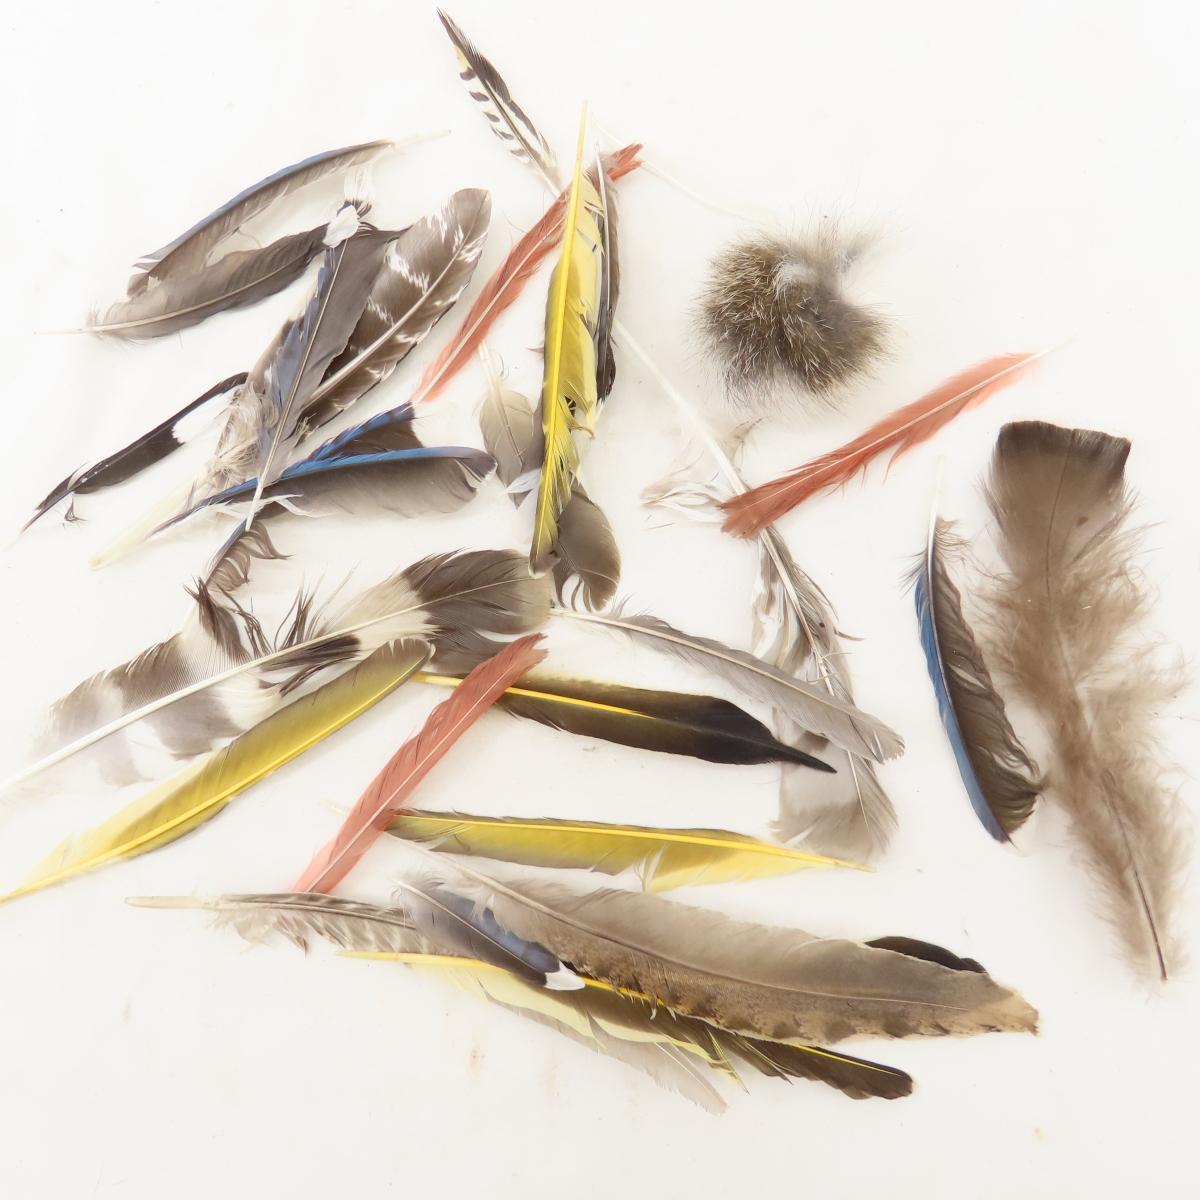 Feathers, buckskins and pelts